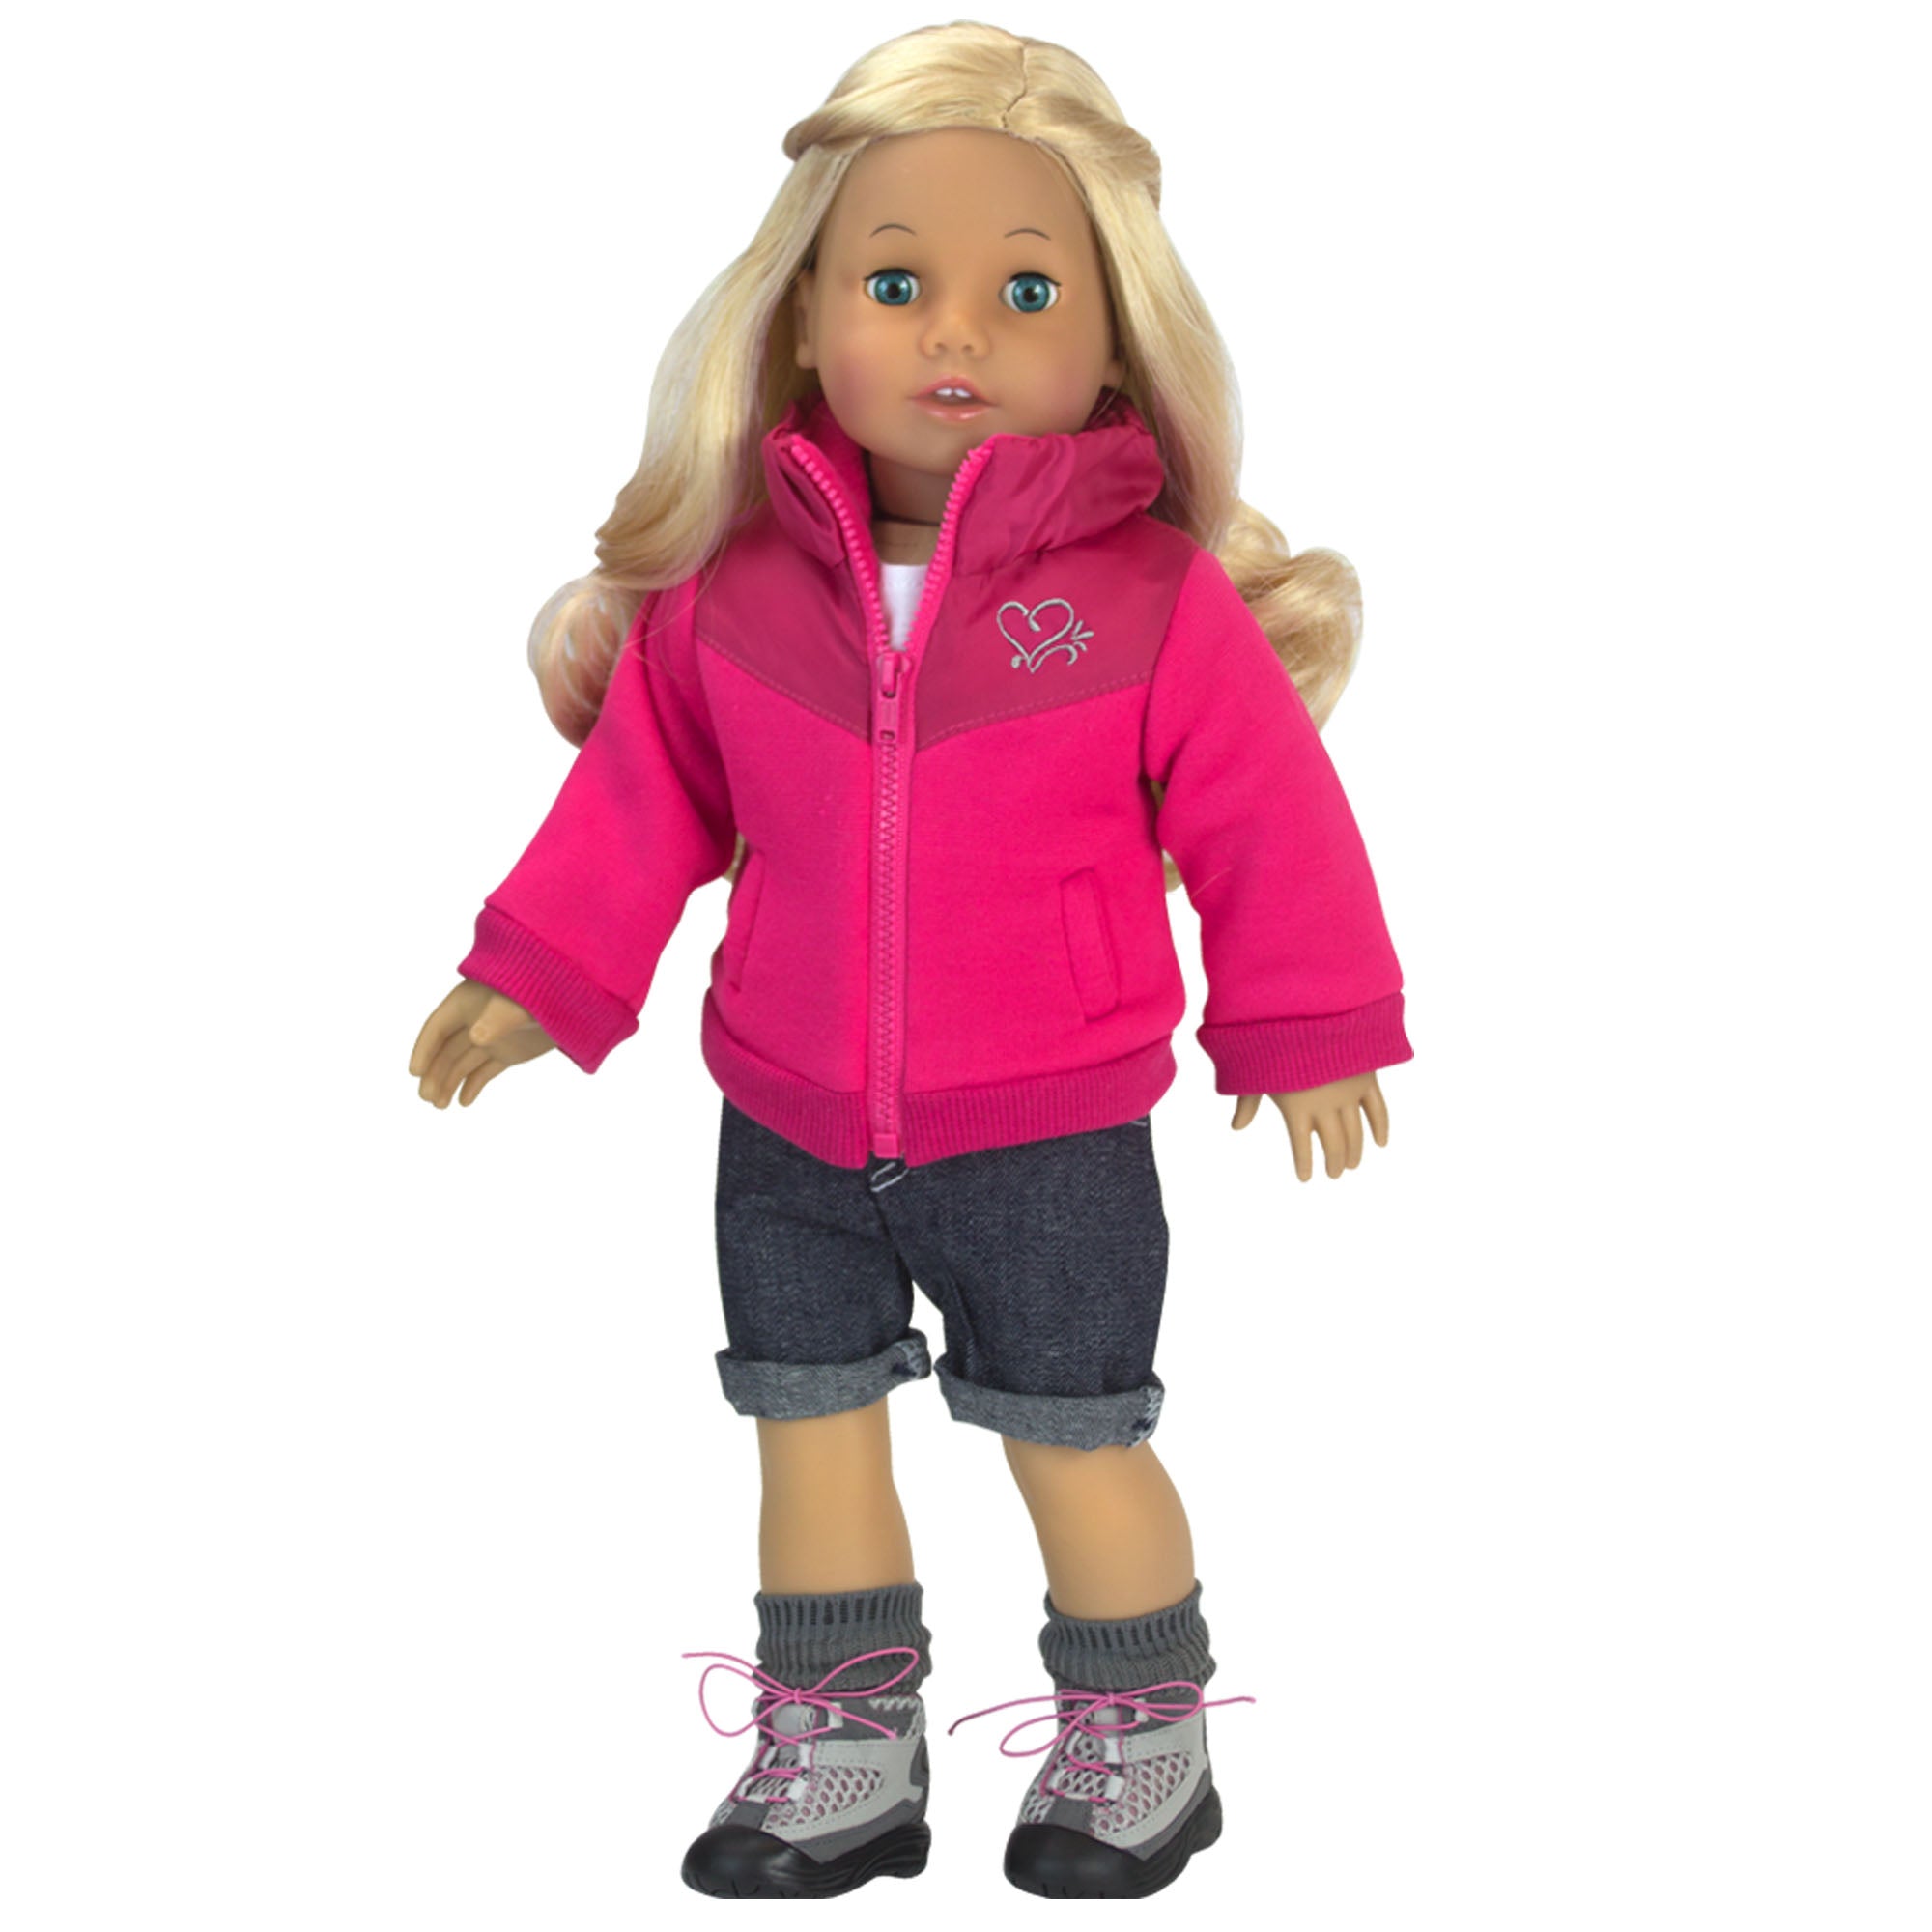 Sophia’s Nylon Fleece-Lined Winter Jacket with Silver Heart Embroidered Applique for 18” Dolls, Hot Pink